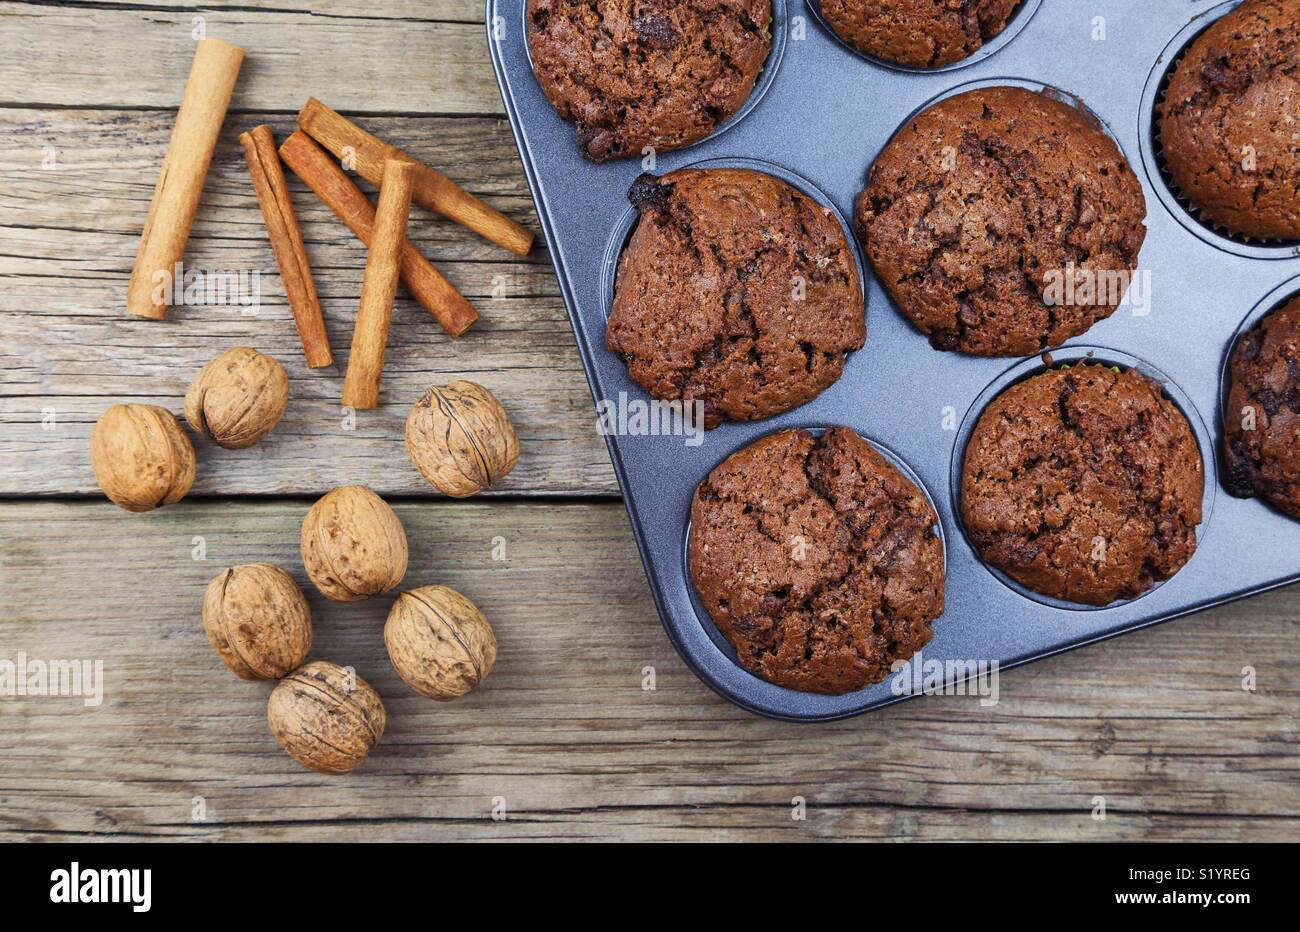 Close up of chocolate muffins on a wooden background Banque D'Images